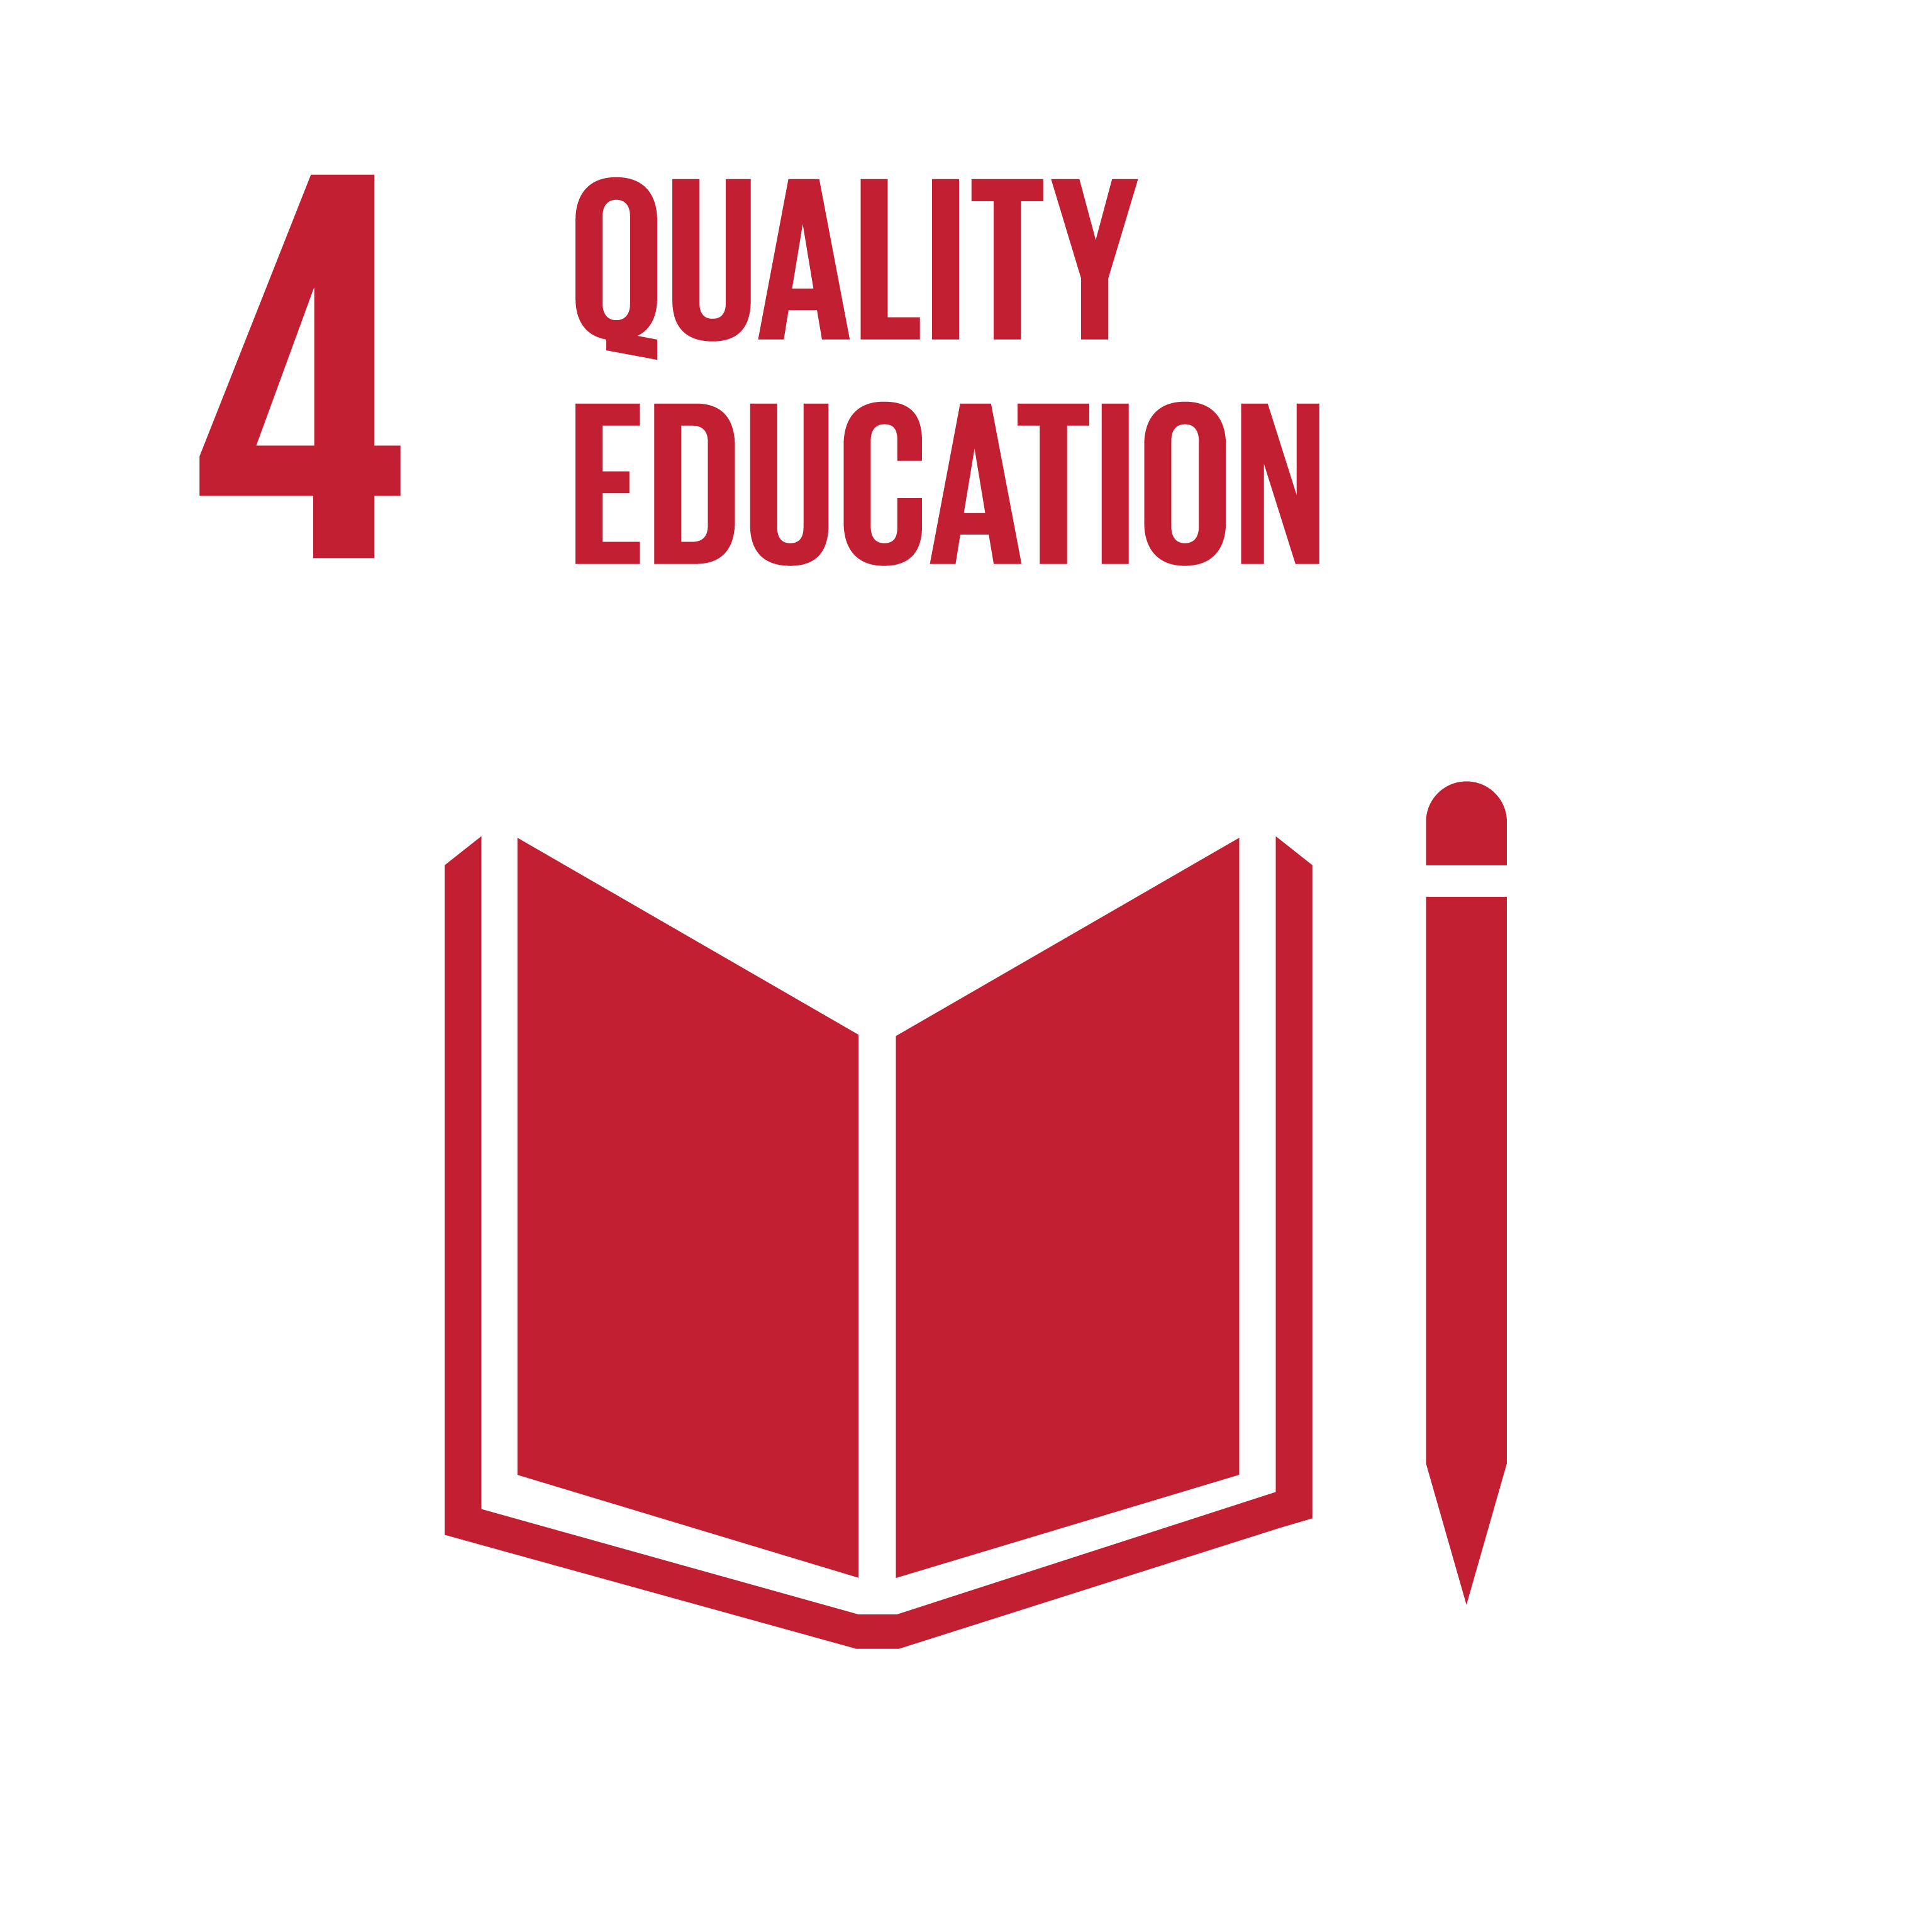 Ensure inclusive and equitable quality education and promote lifelong learning opportunities for all